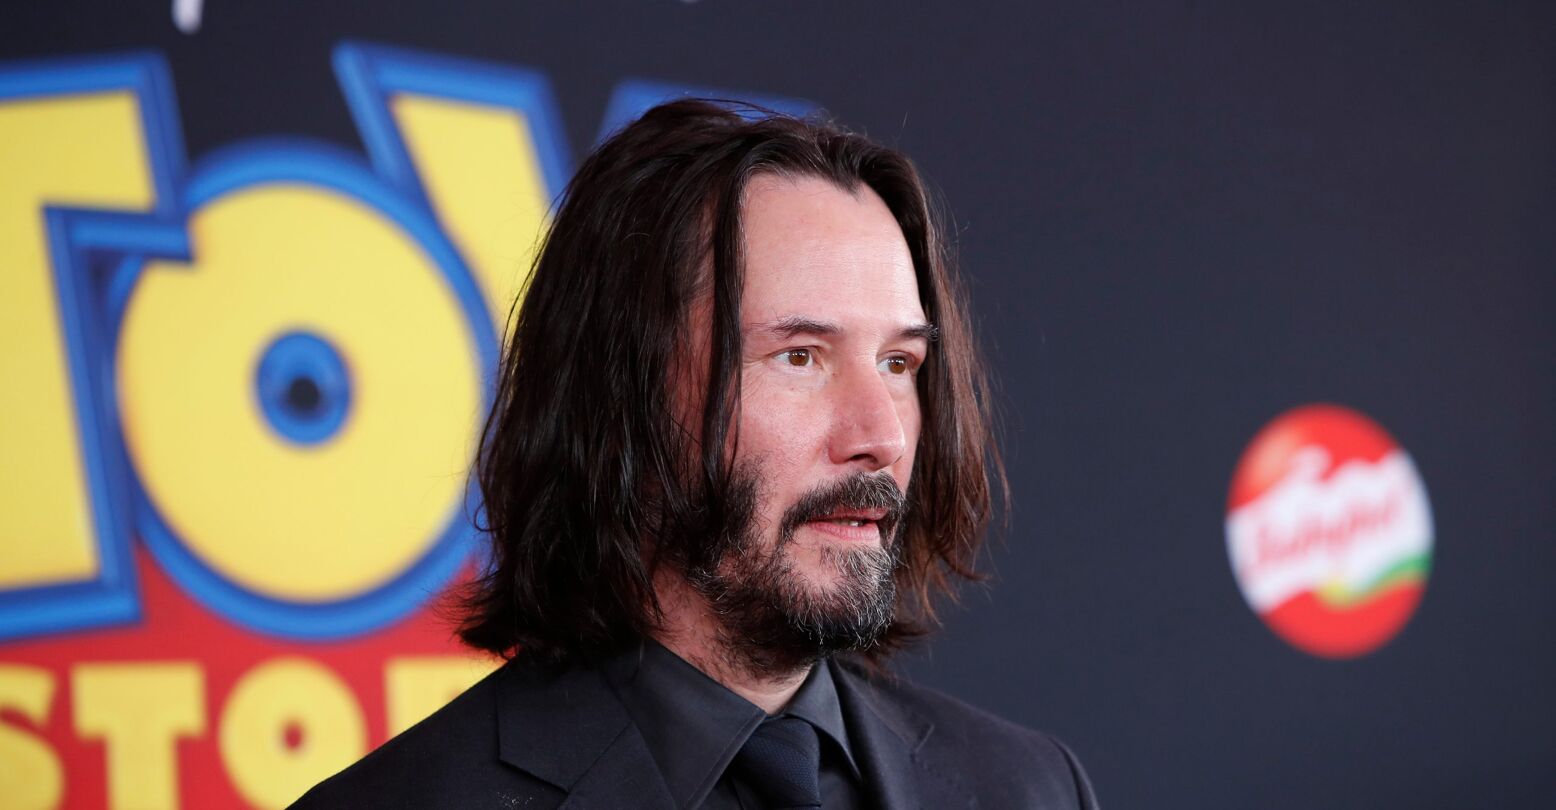 Keanu Reeves at the &quot;Toy Story 4&quot; Premiere at the El Capitan Theater on June 11, 2019 in Los Angeles, CA